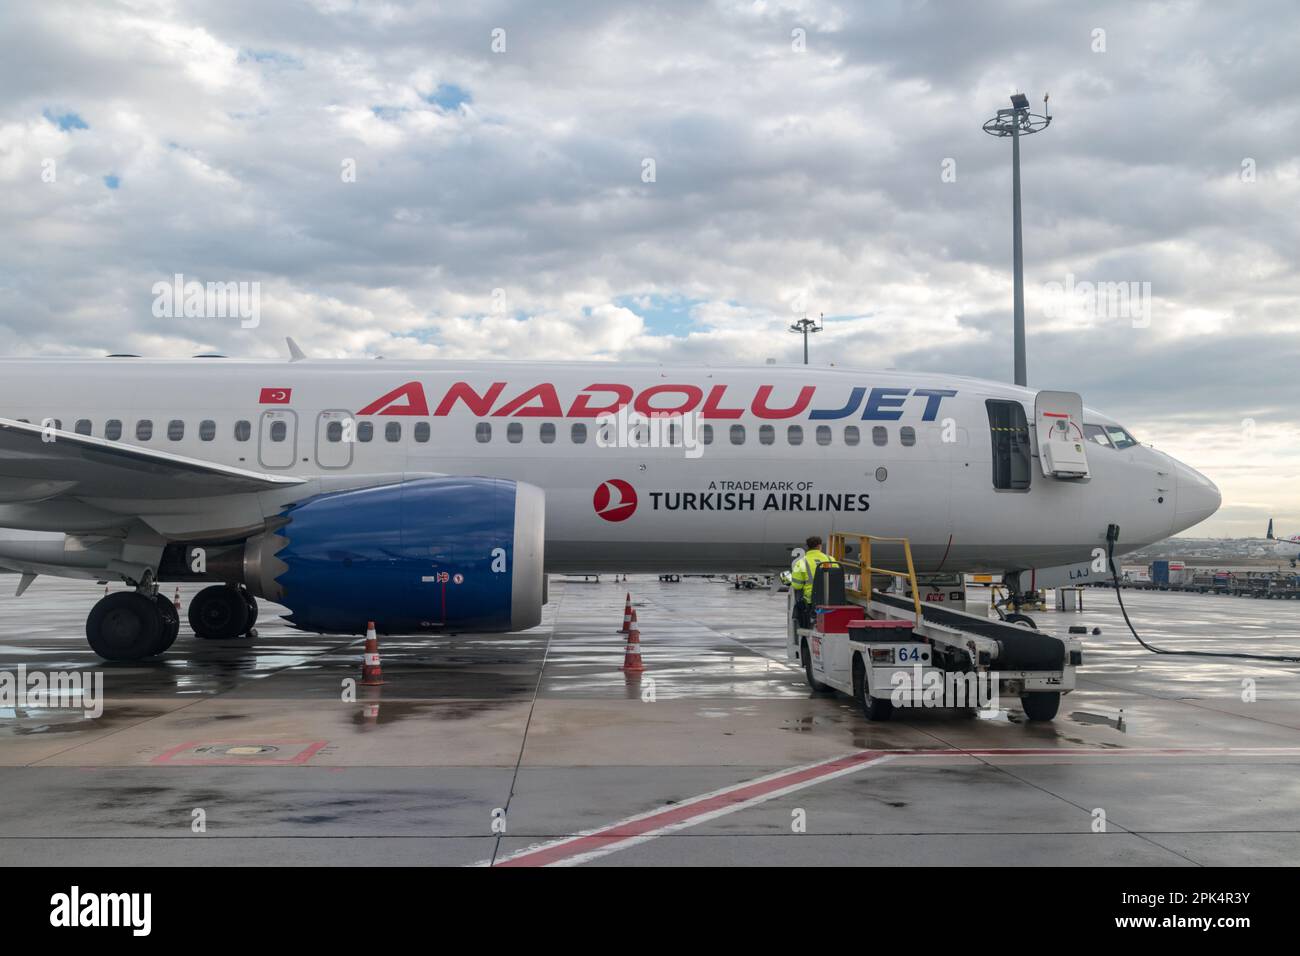 Istanbul, Turkey - December 12, 2022: Plane of AnadoluJet, part of Turkish Airlines. Stock Photo